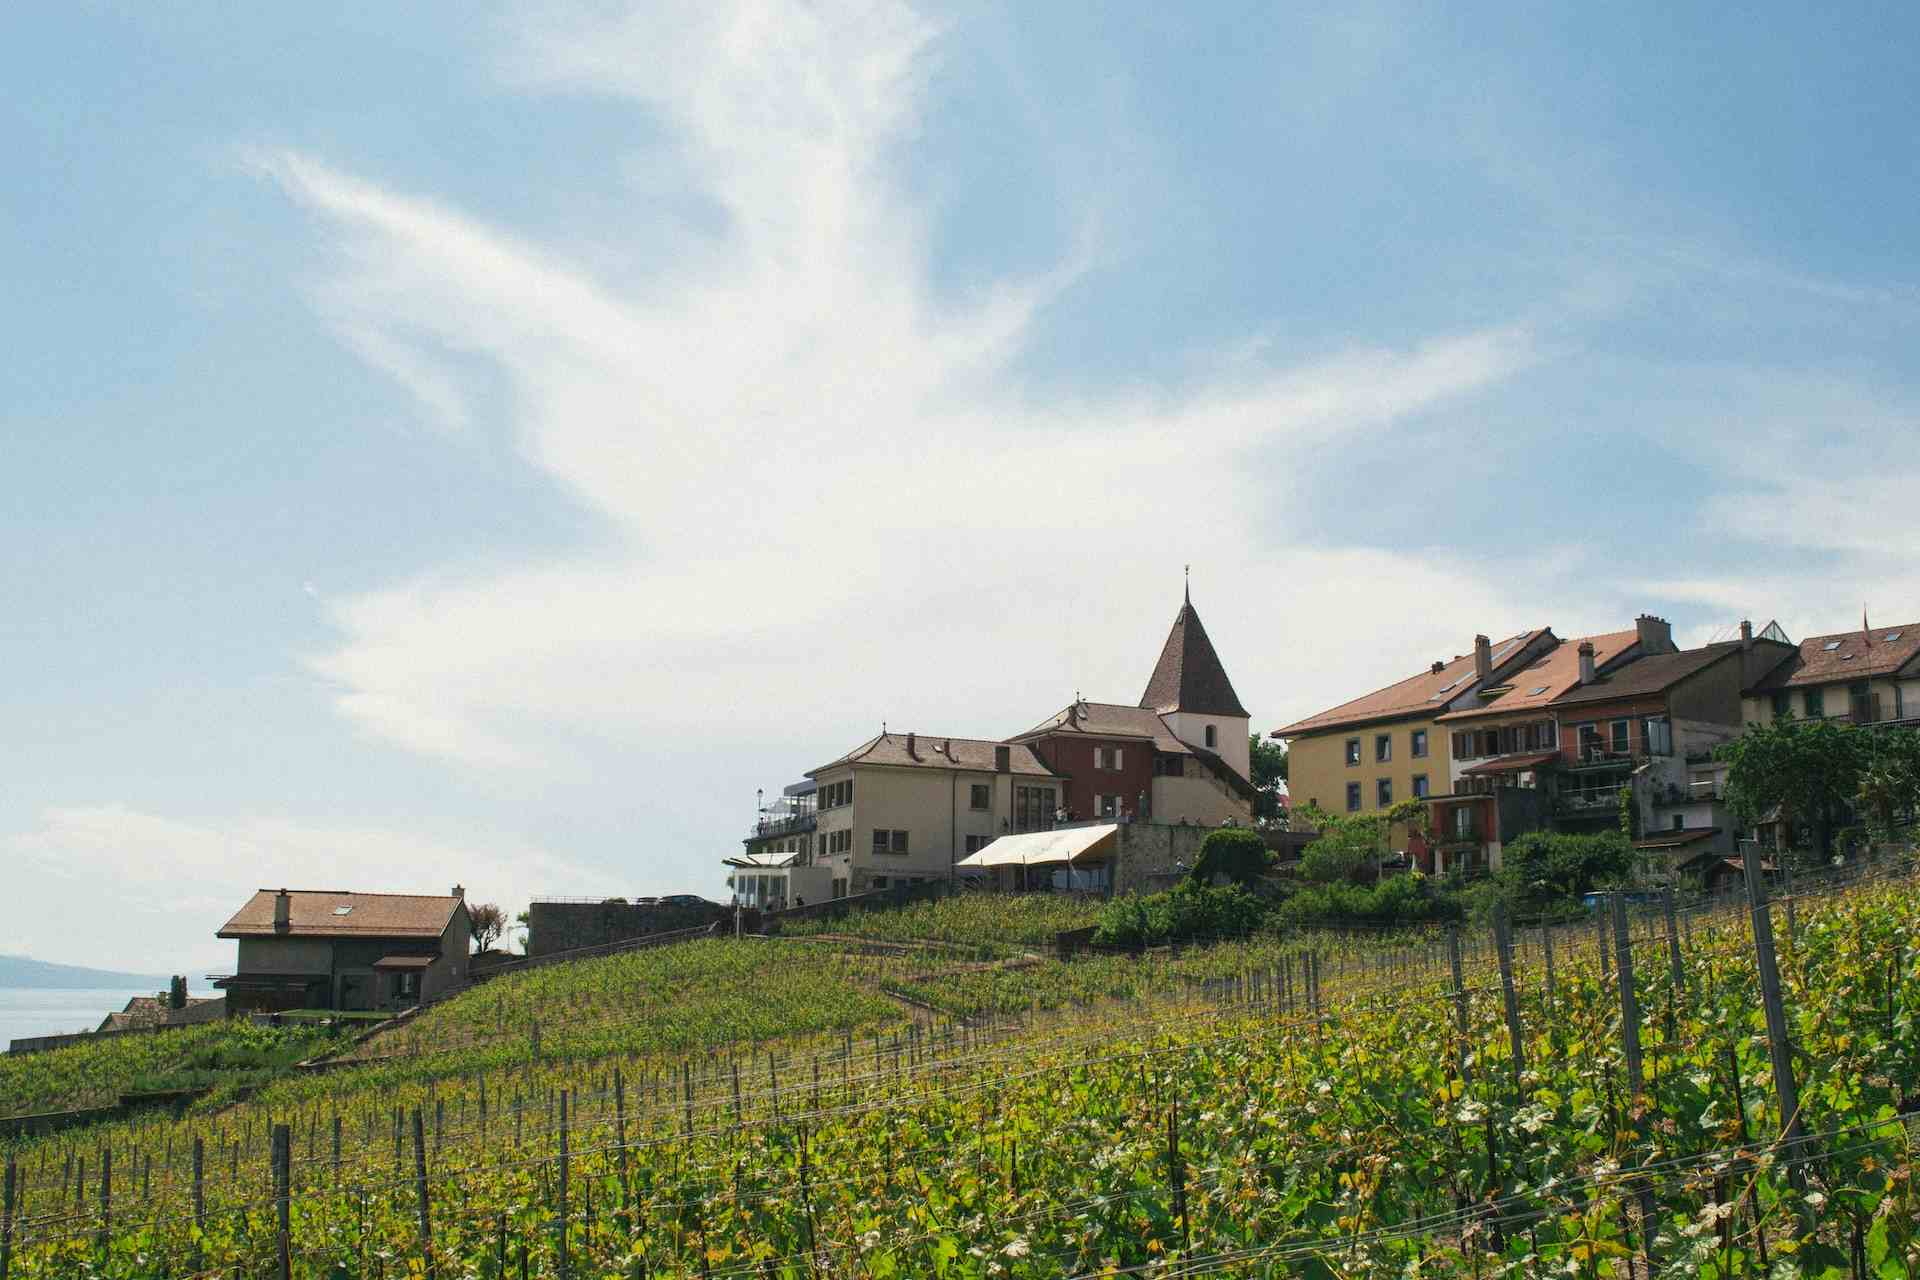 Le Cellier Du Mas, producer in Mont-sur-Rolle canton of Vaud in Switzerland